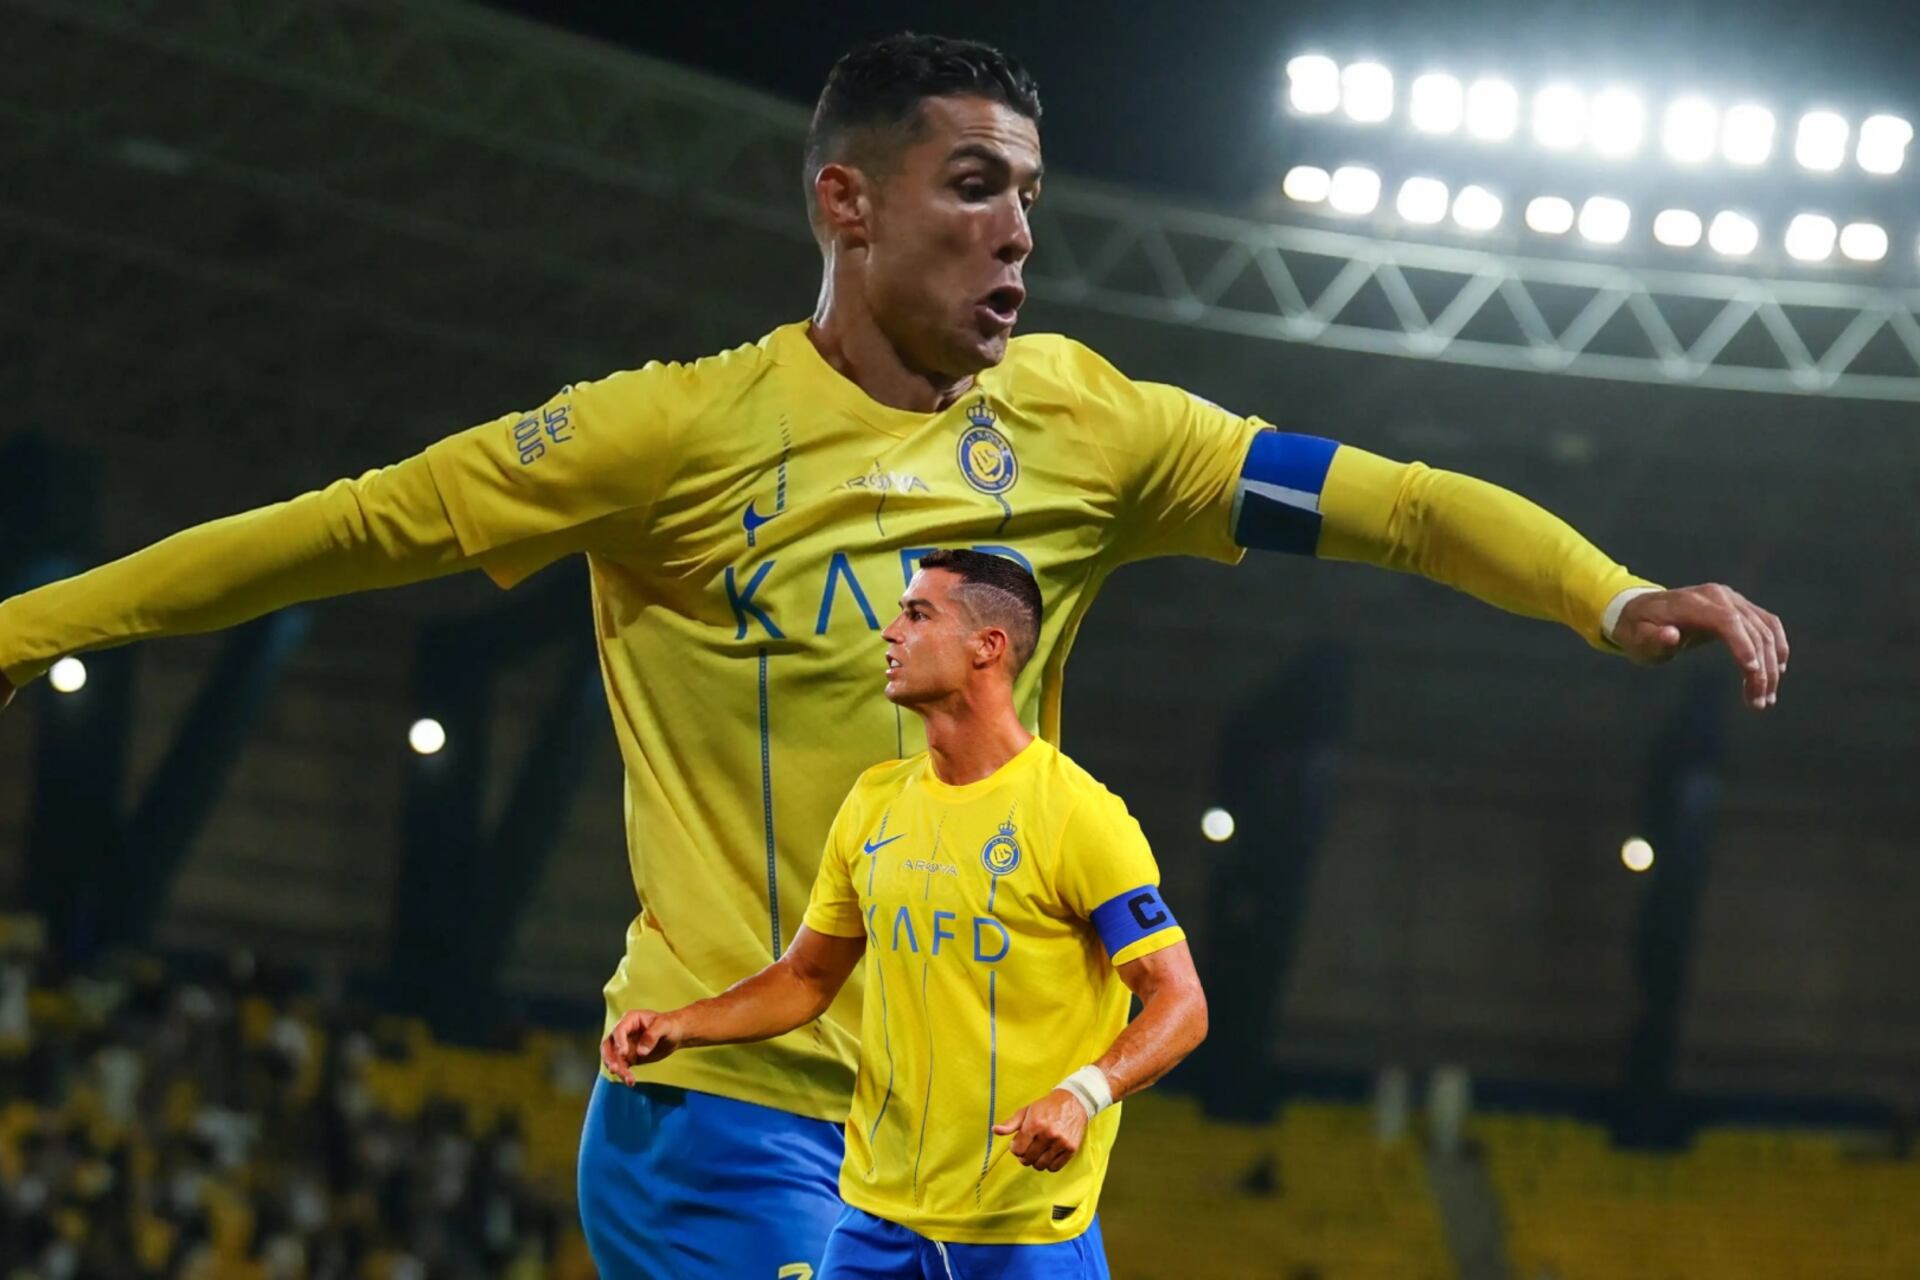 (VIDEO) It's not the SIUU, the new celebration of Cristiano Ronaldo at Al Nassr that went viral